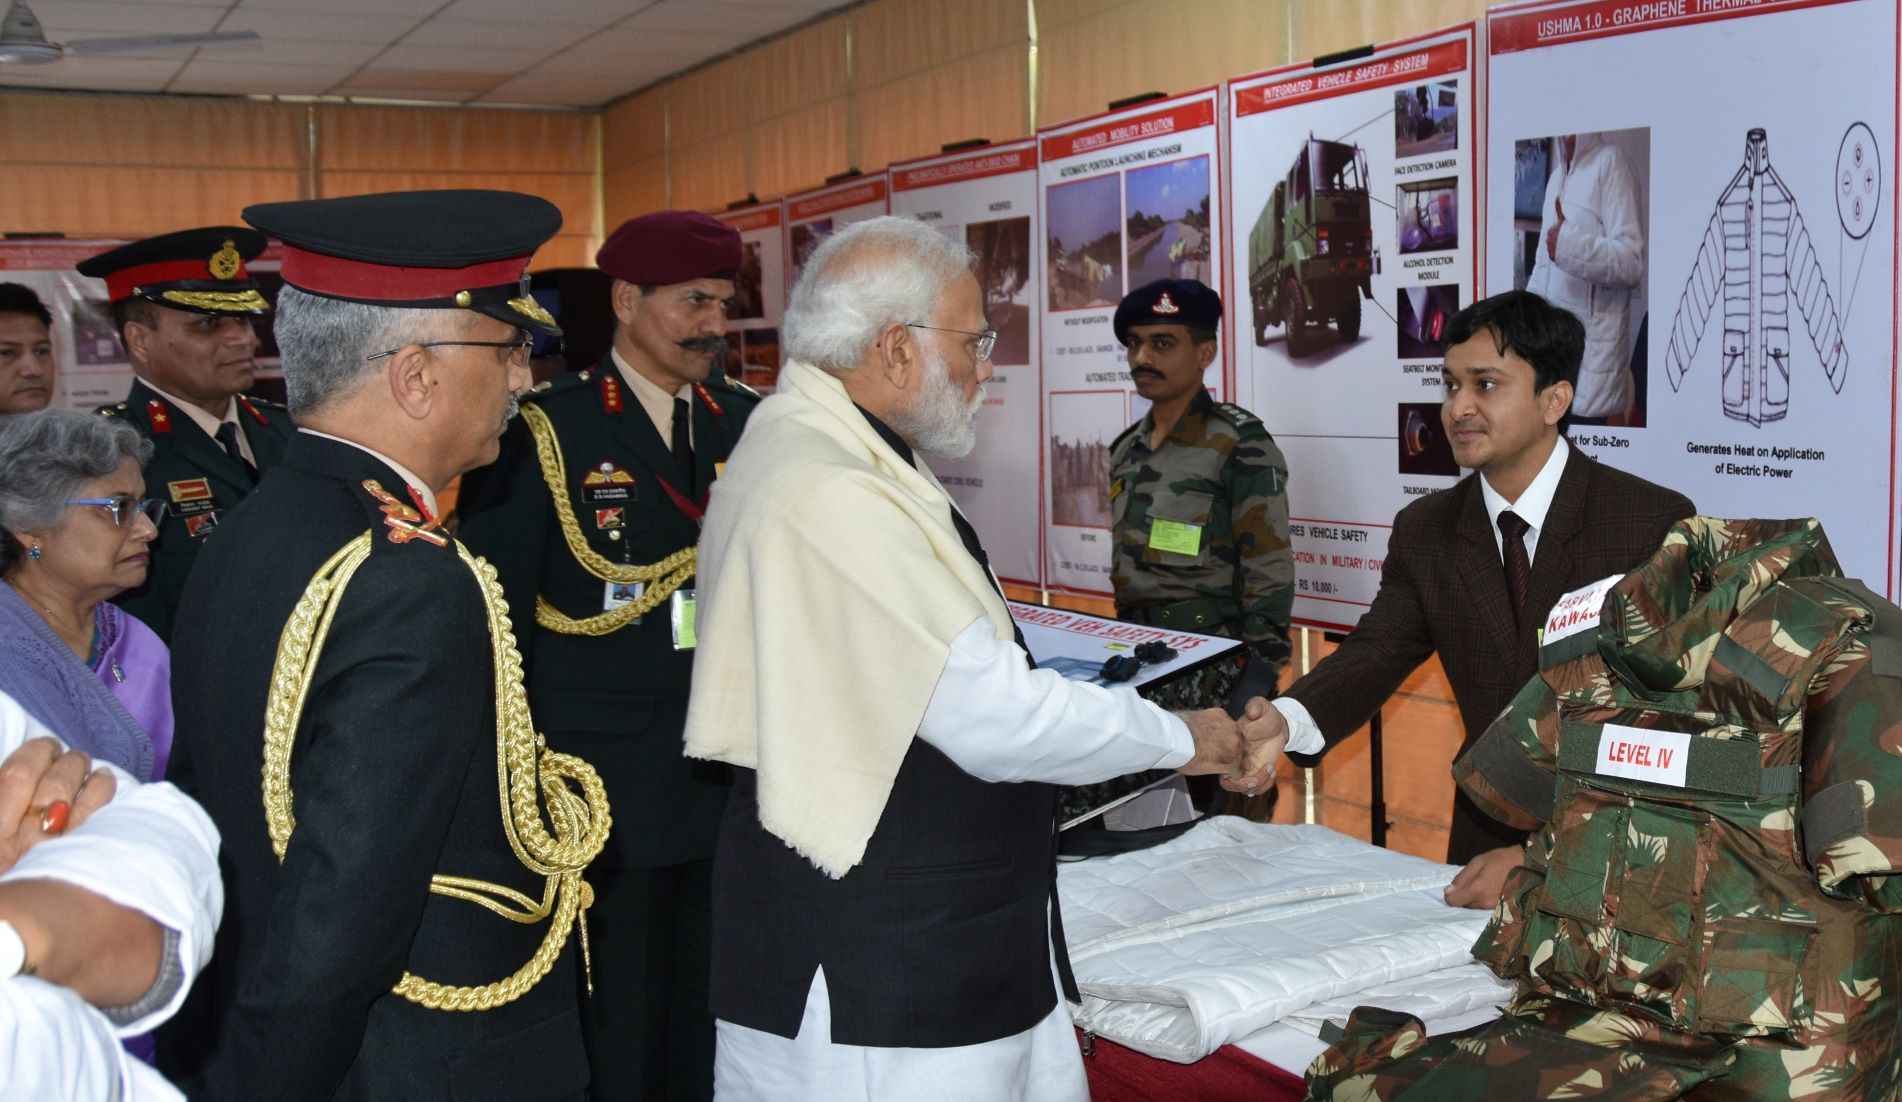 Presentation of the jacket to PM Mod